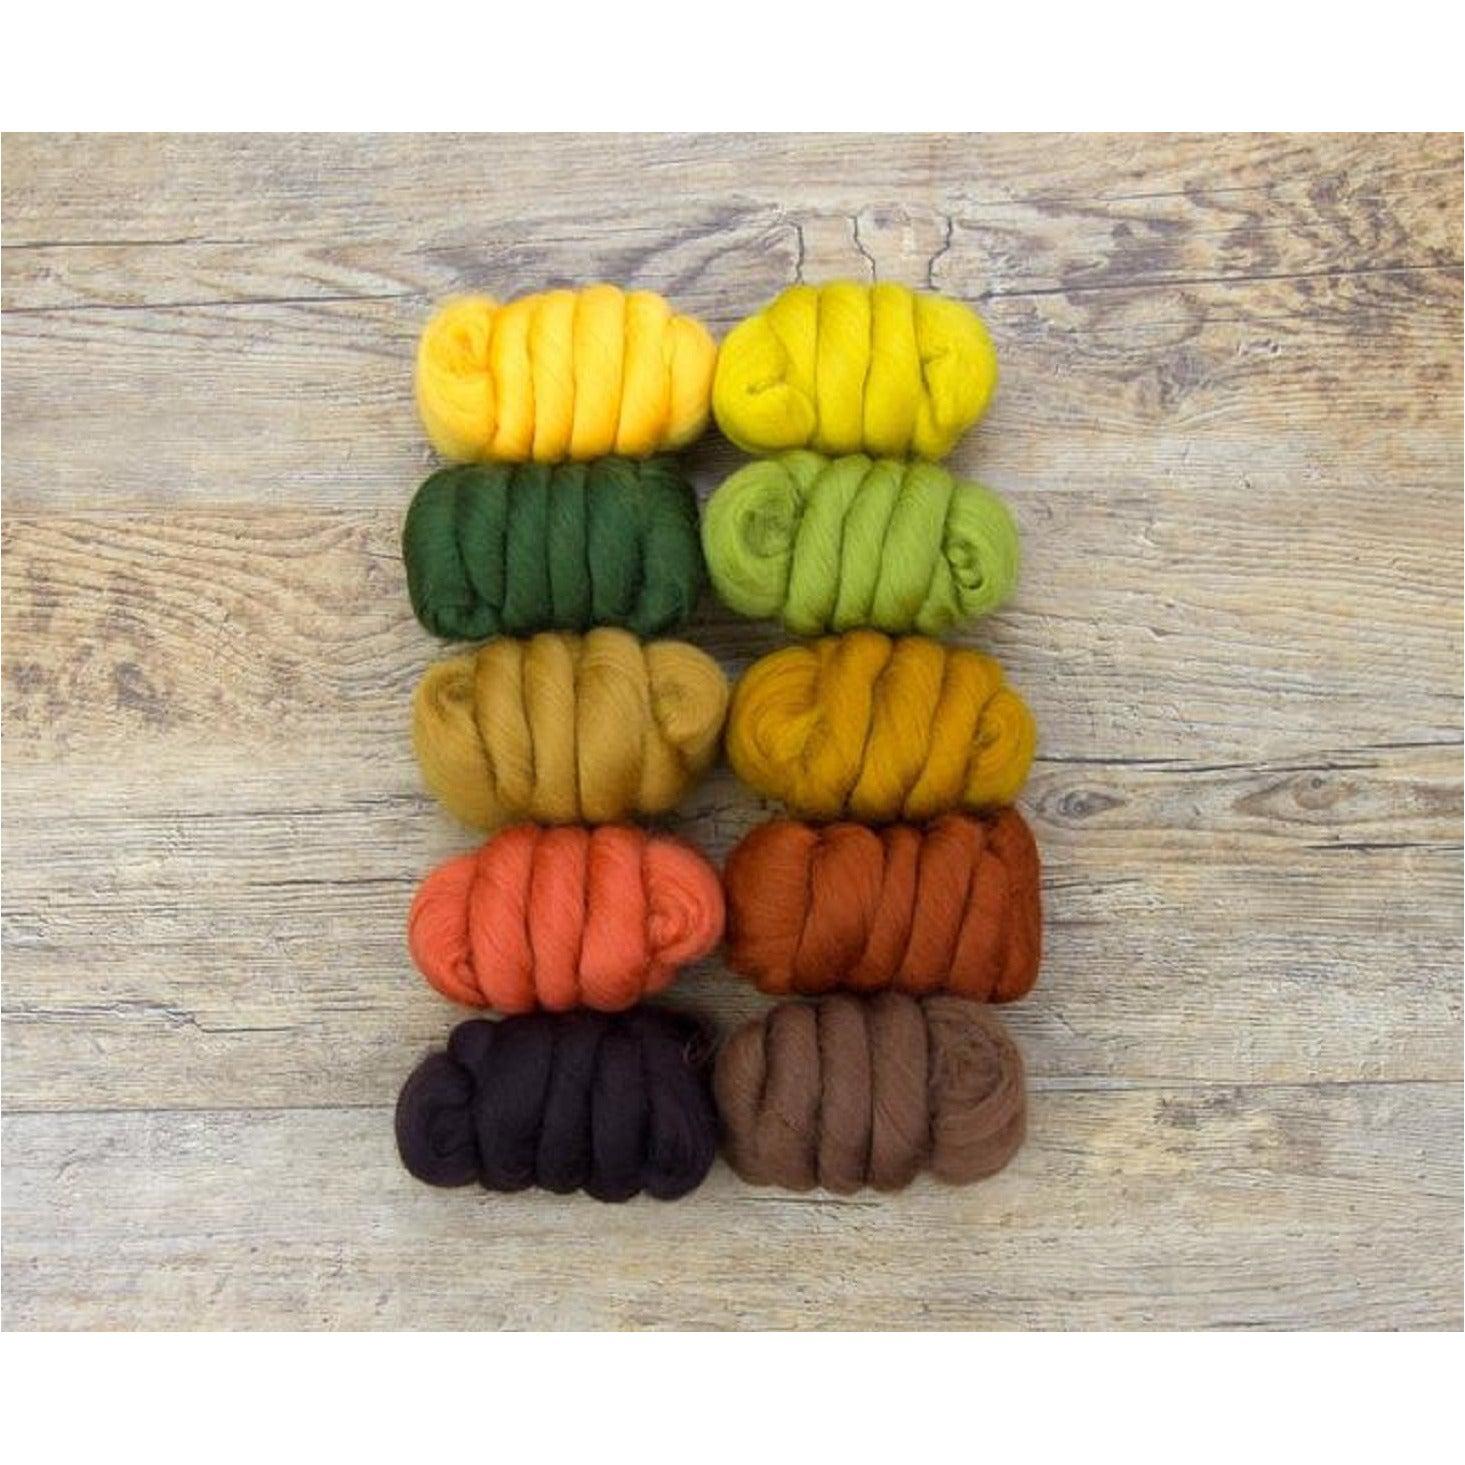 Mixed Merino Wool Variety Pack | Autumn Leaves (Multicolored) 250 Grams, 23 Micron - Textile Indie 